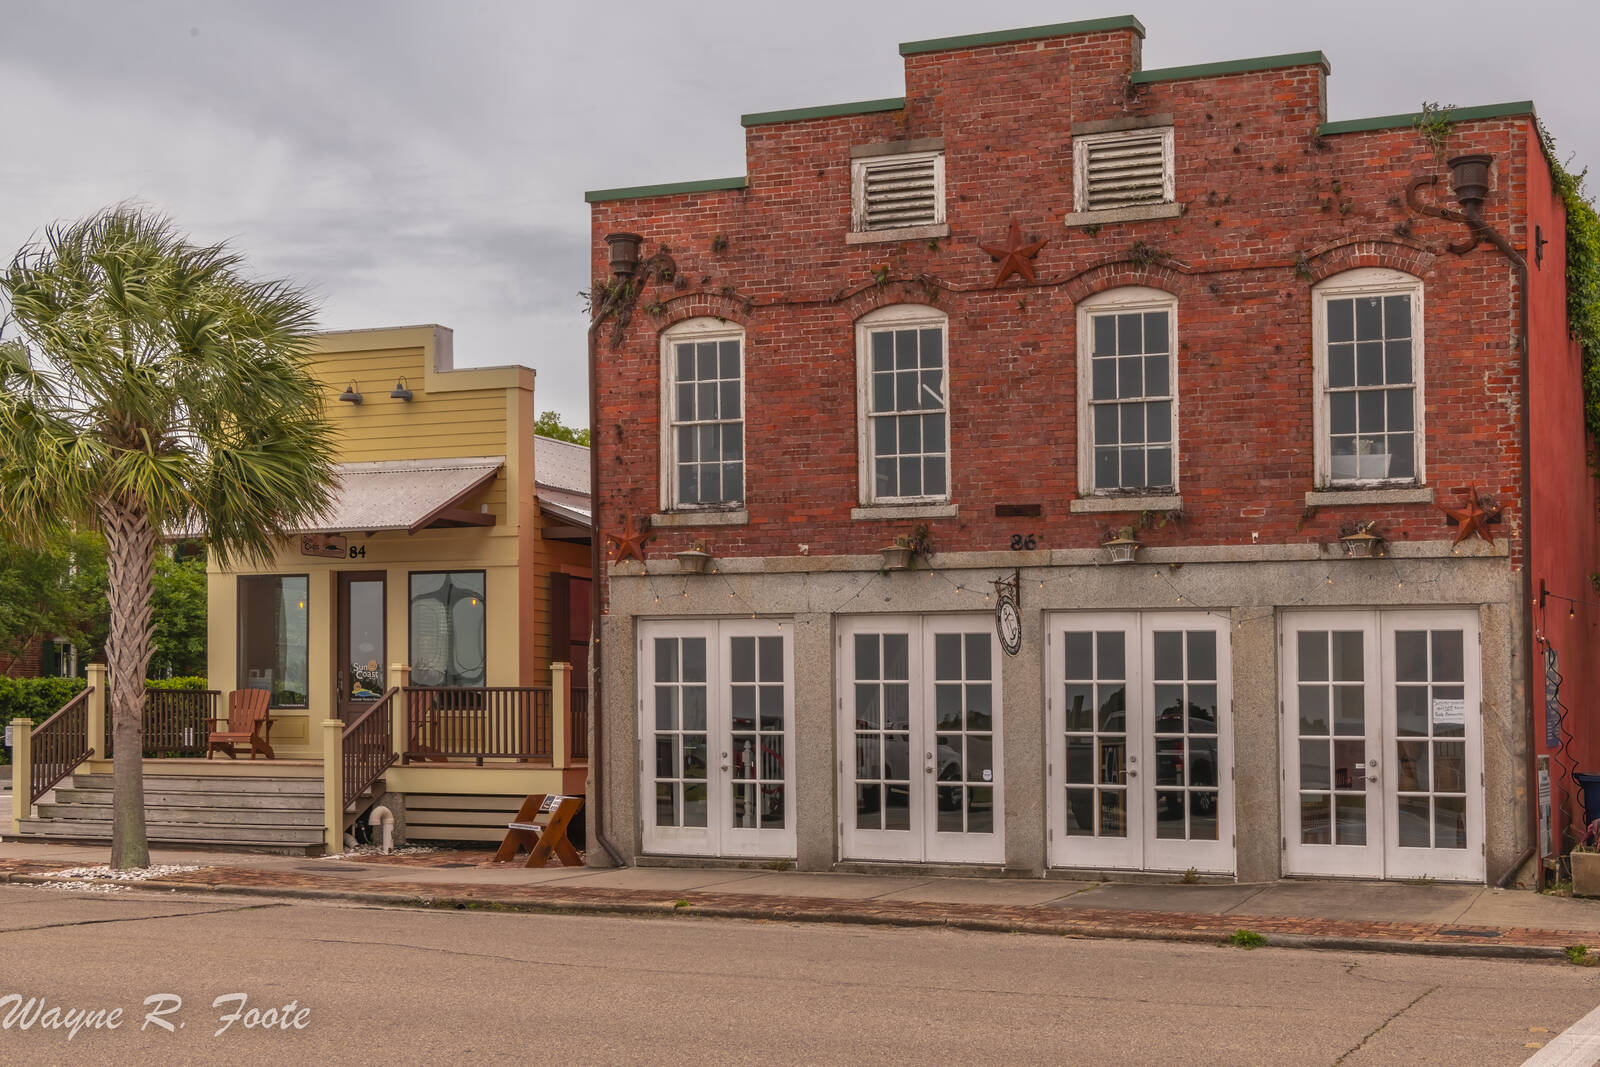 Image of Downtown Apalachicola by Wayne Foote